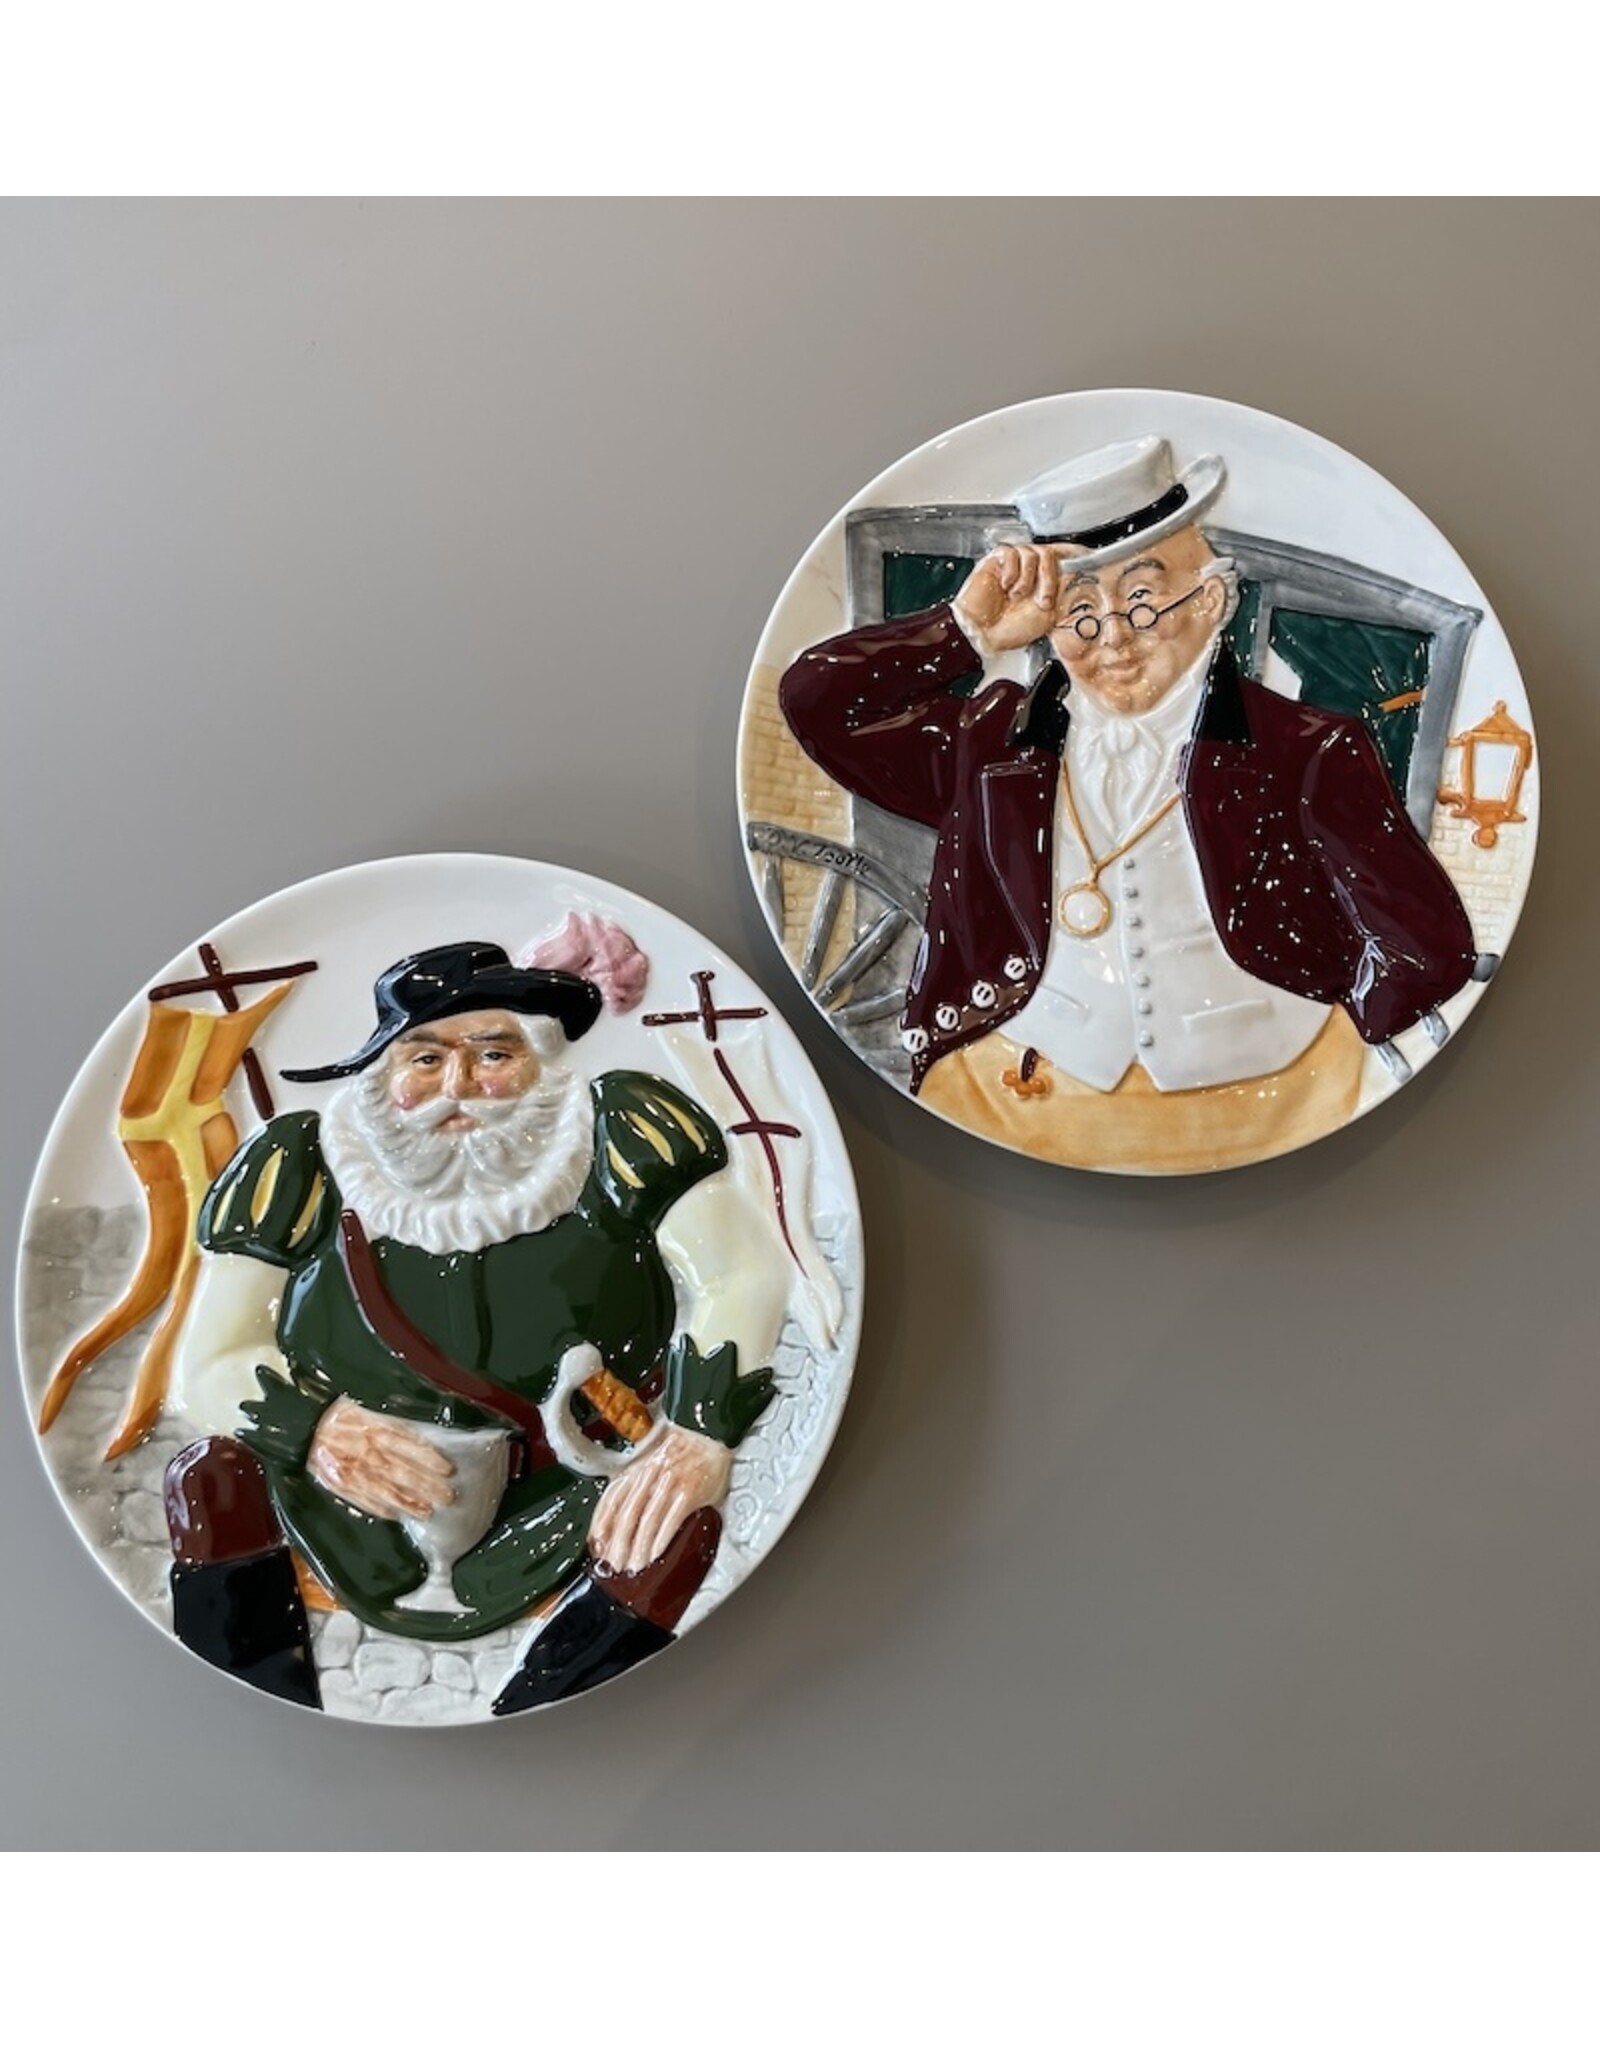 LIMITED EDITION DAVENPORT POTTERY TOBY WALL PLATE